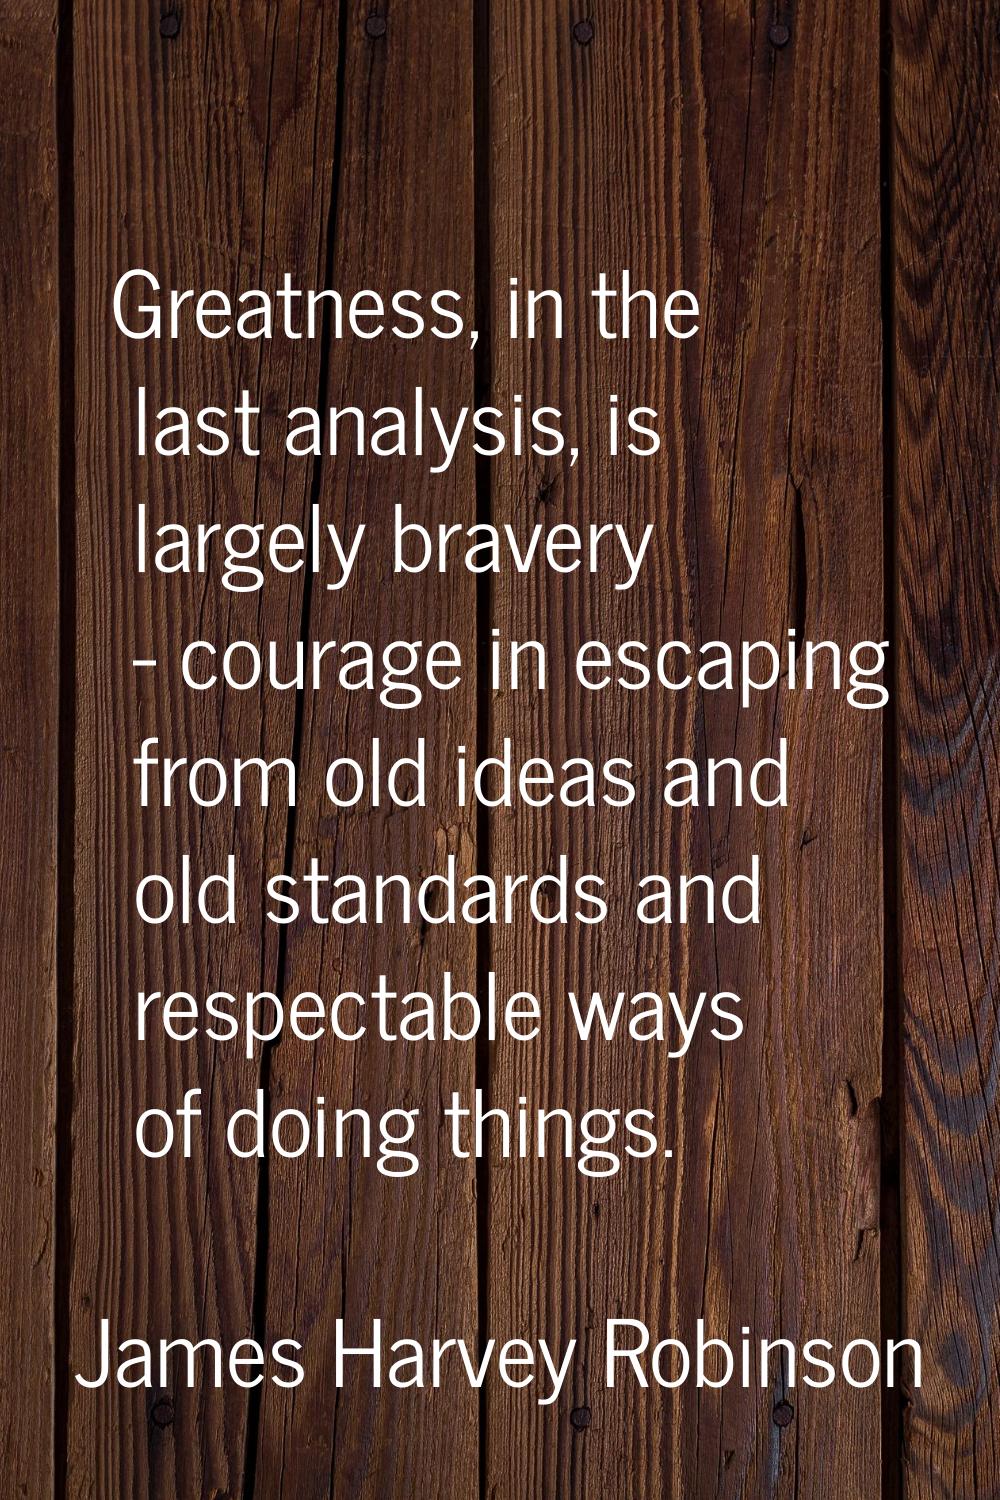 Greatness, in the last analysis, is largely bravery - courage in escaping from old ideas and old st